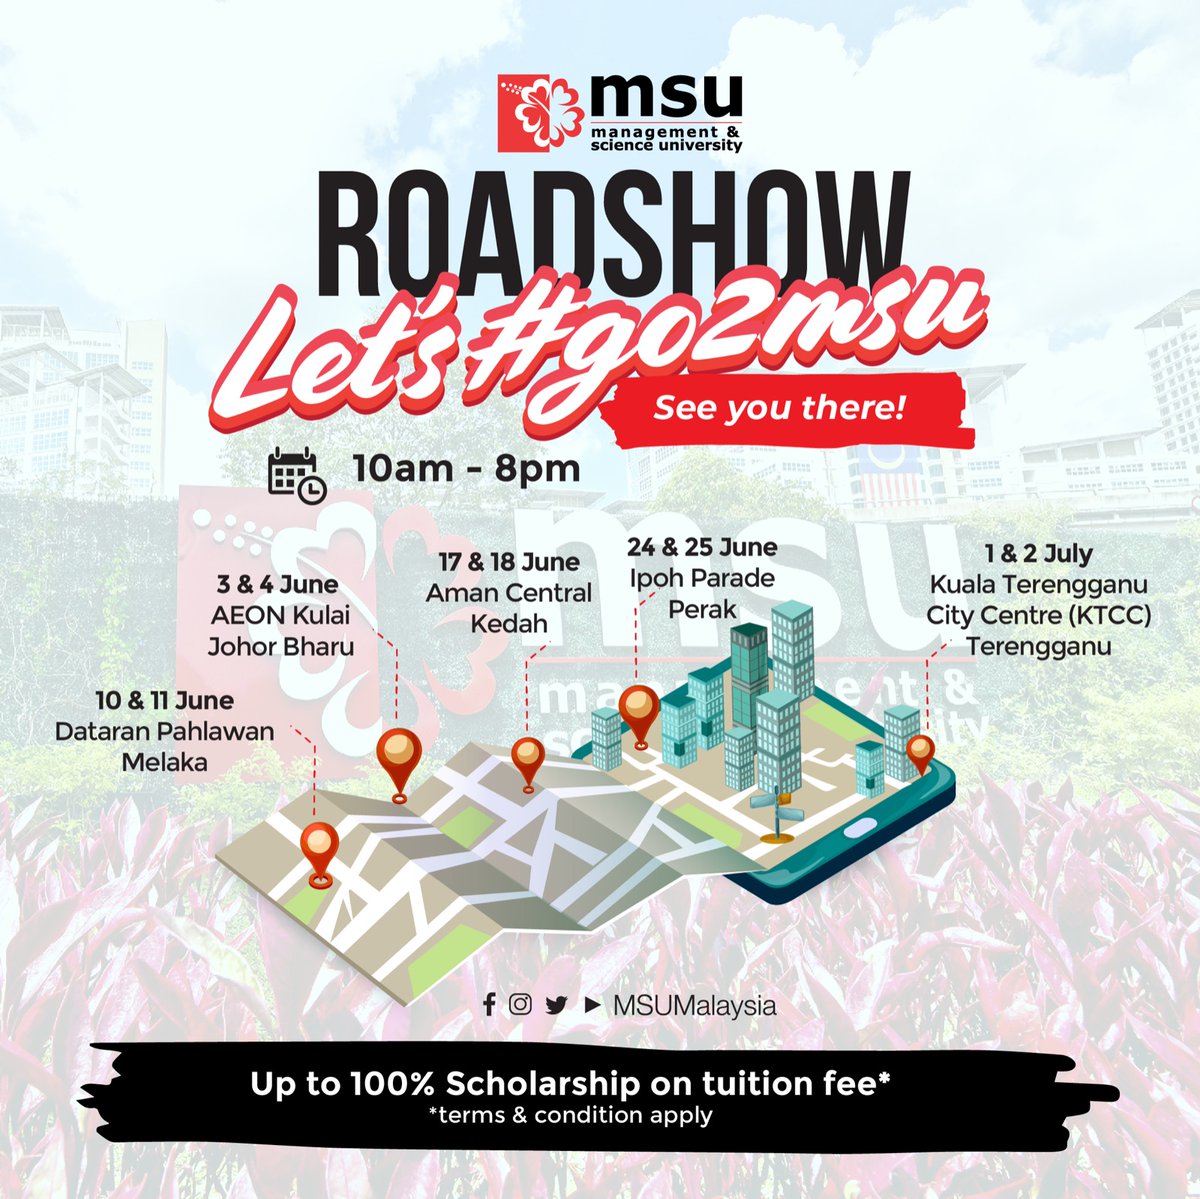 Hai guys, @MSUmalaysia will be nationwide this month to meet & assist you to choose your program of choice for your study. Contact us now 03 5521 6868 for details & don't forget to grab @YayasanMSU scholarship for your study. See you there!! #beMSUrians #Enrol2MSU #MSUroadshow